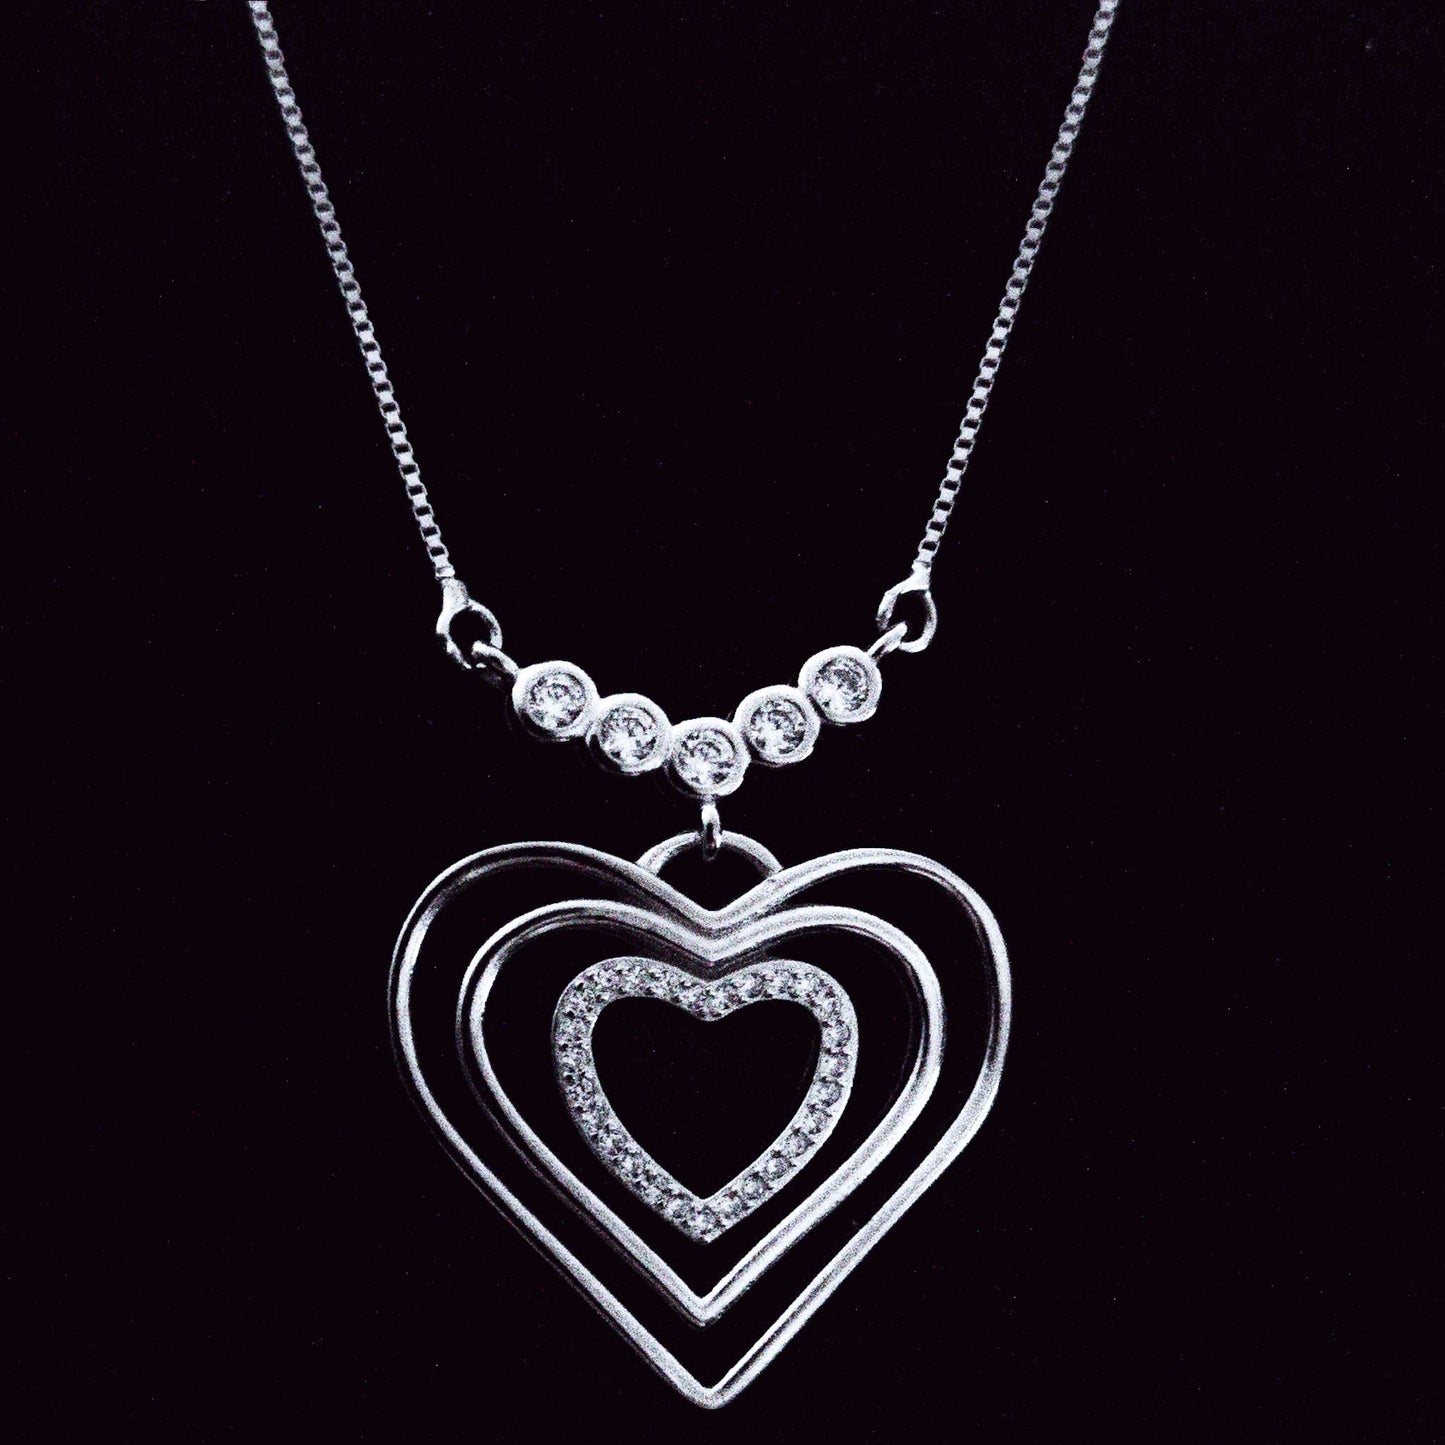 Sterling Silver Three Heart Necklace with Cubic Zirconia | 3 Heart Pendant